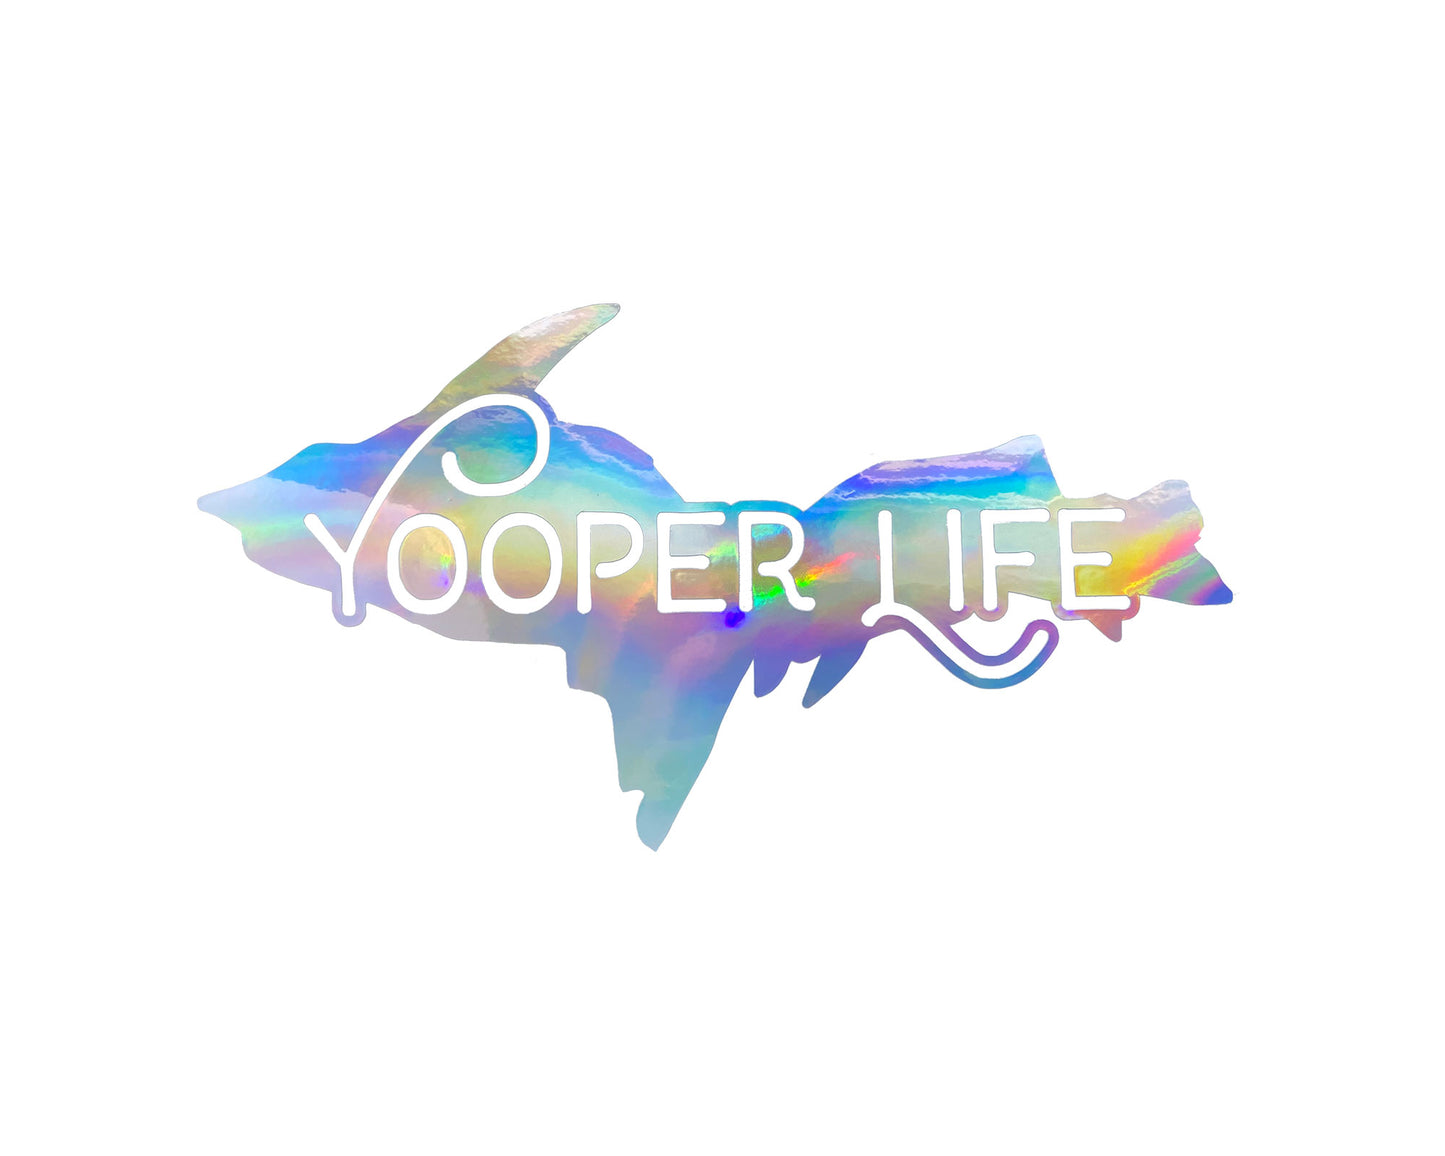 Yooper Life Car Decal, Upper Michigan Holographic Decals, U.P. Gift for Yooper